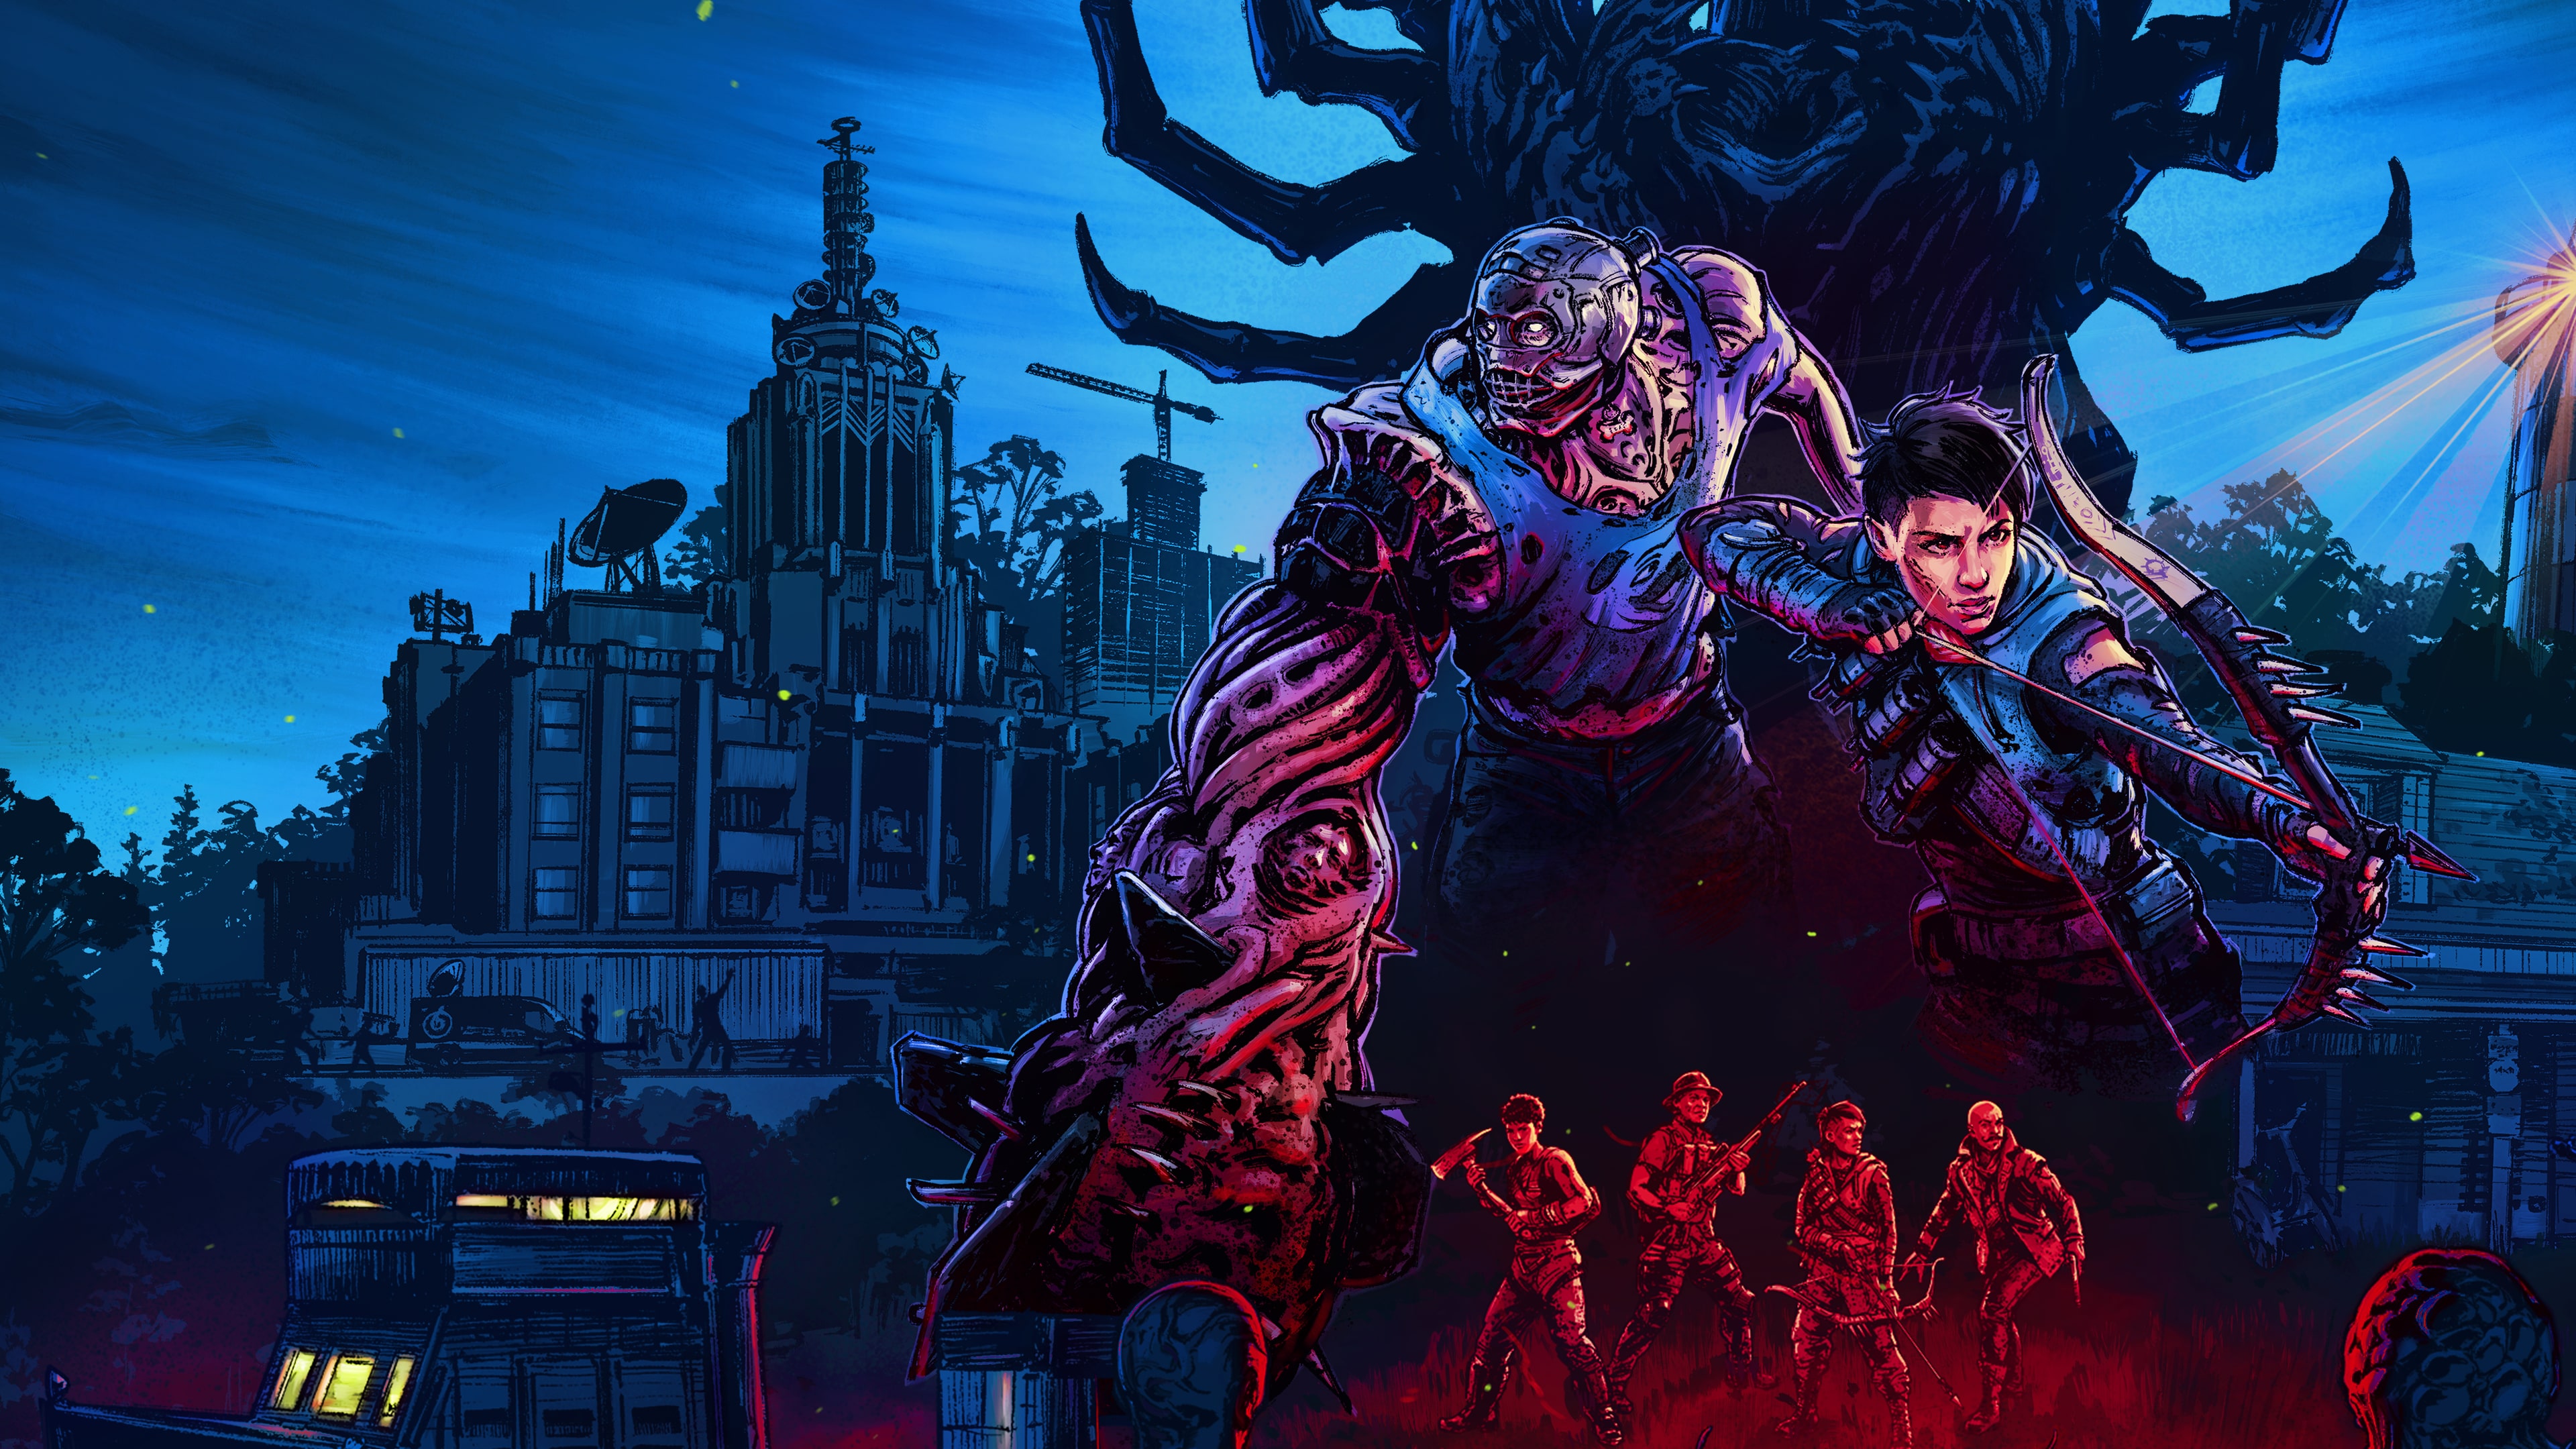 Back 4 Blood is BACK 4 FREE - Join the PC & Consoles Cross Play